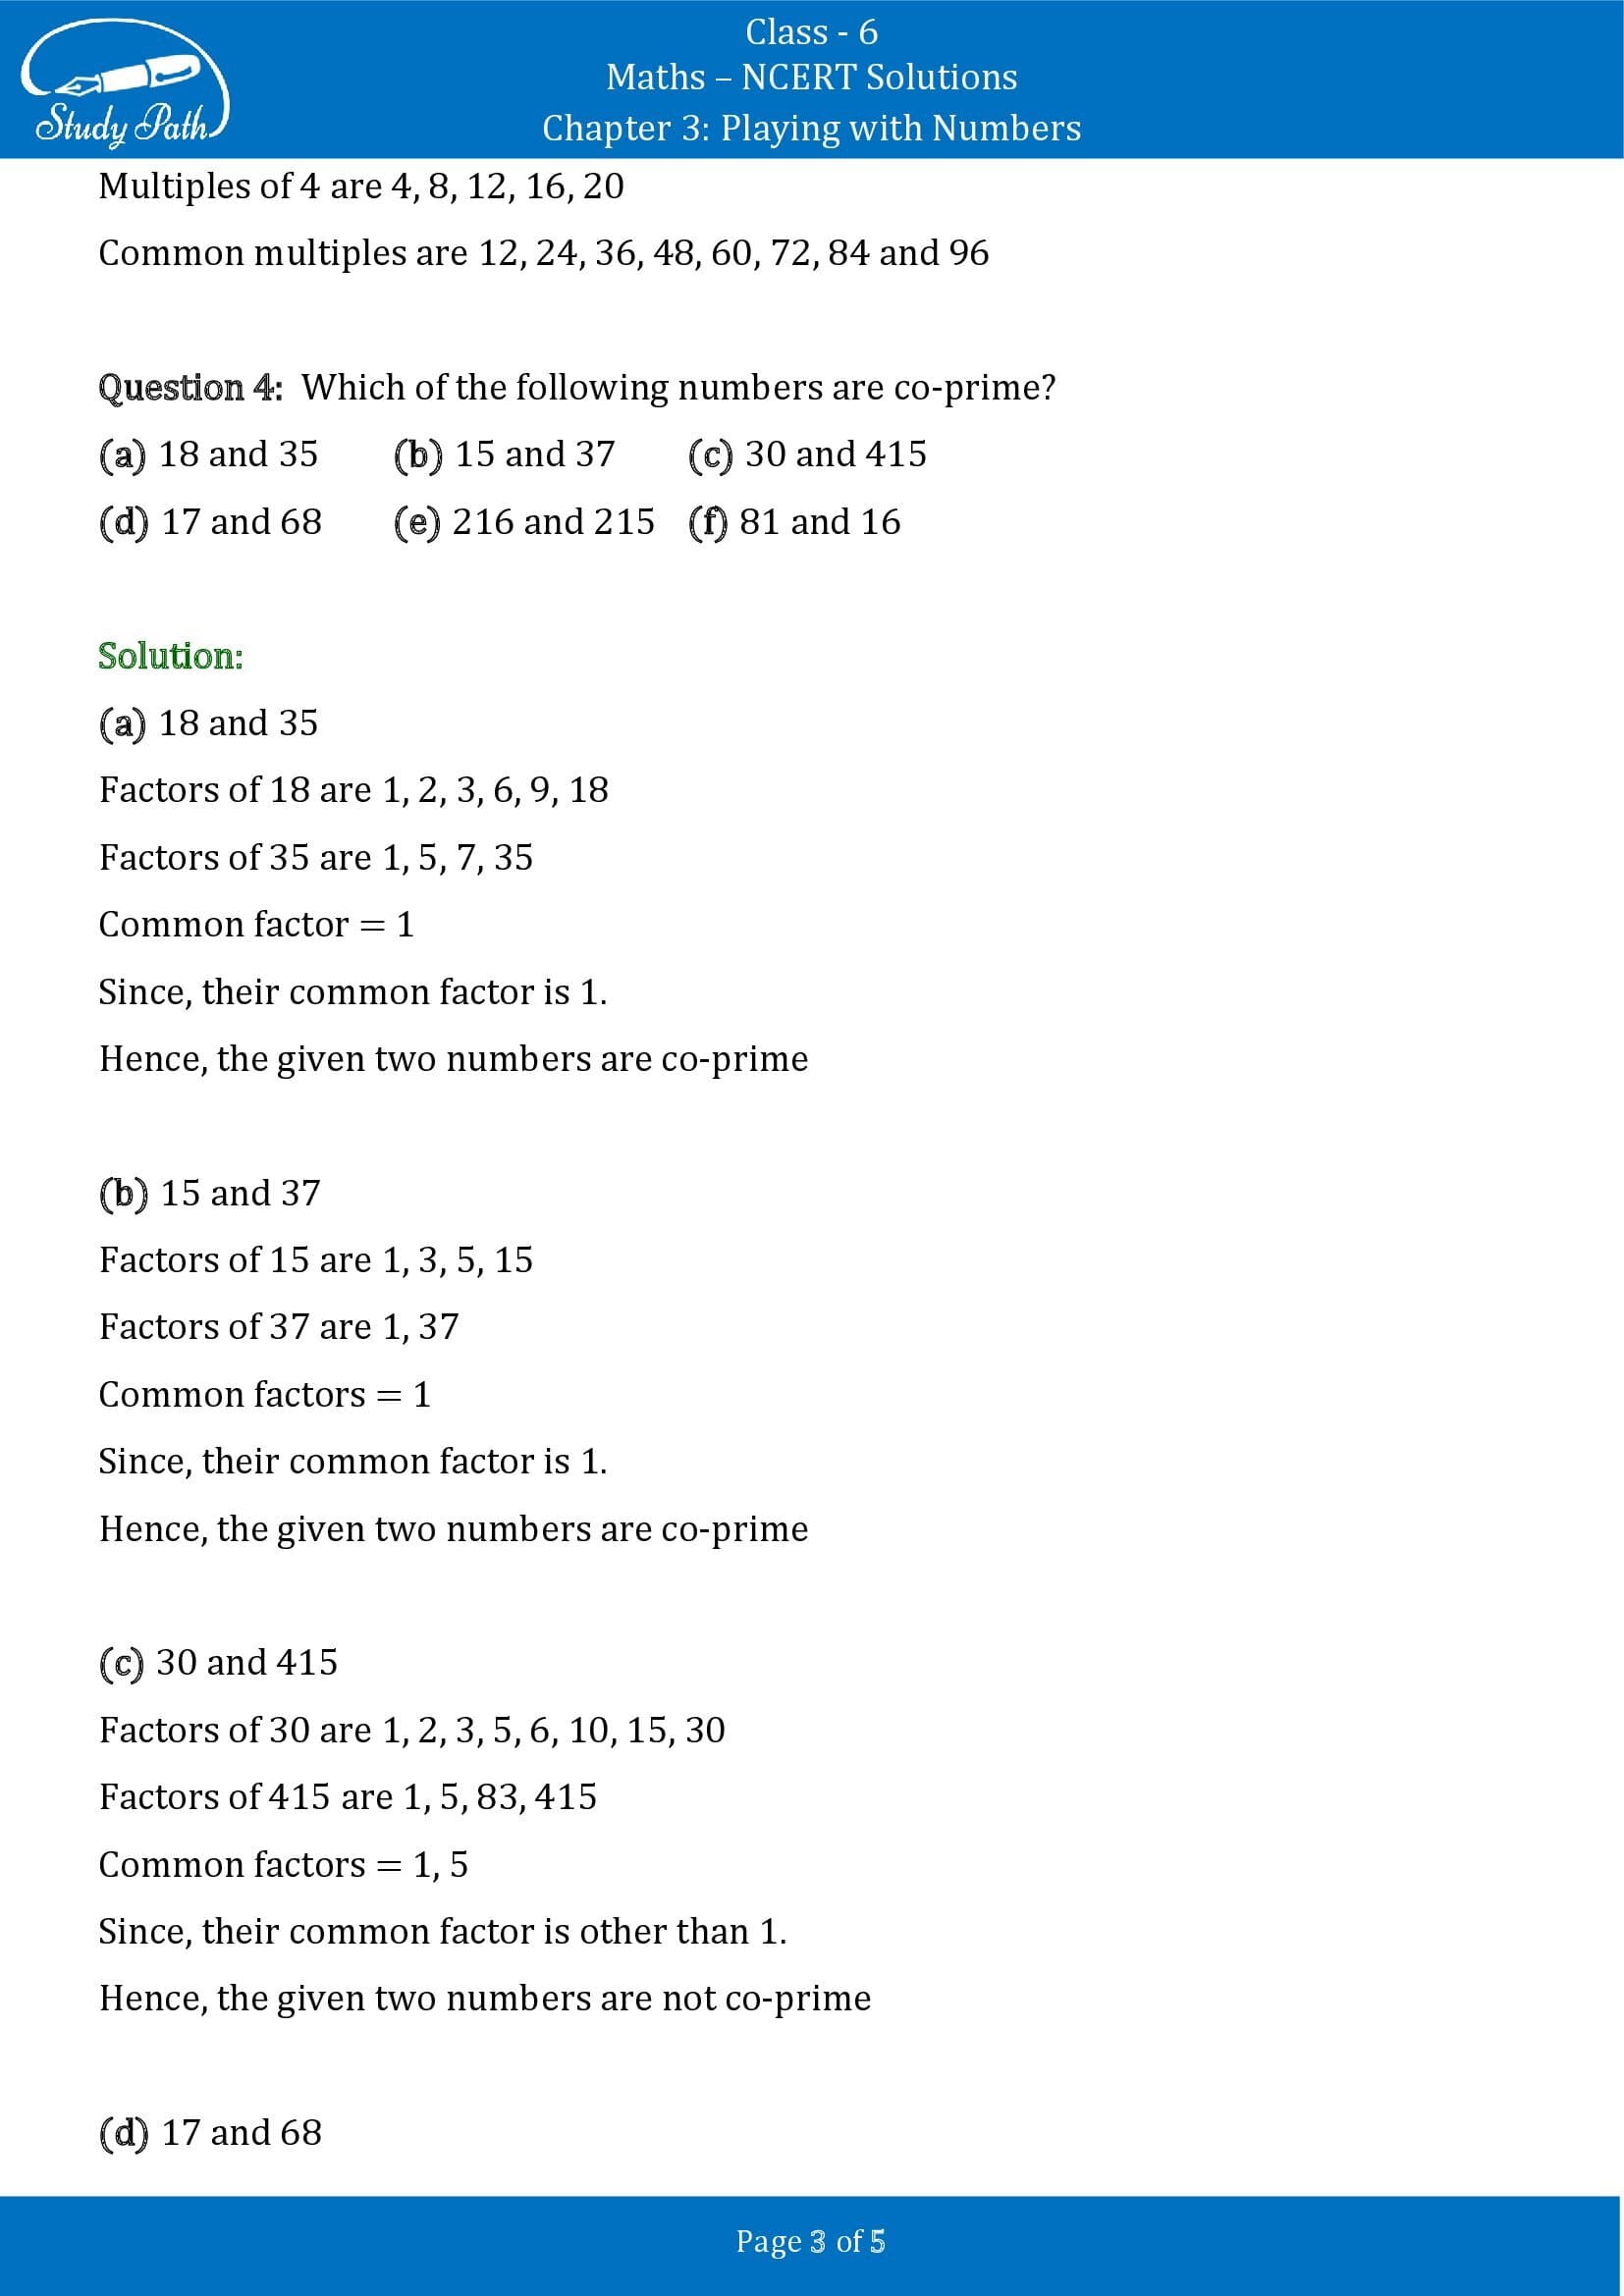 NCERT Solutions for Class 6 Maths Chapter 3 Playing with Numbers Exercise 3.4 00003